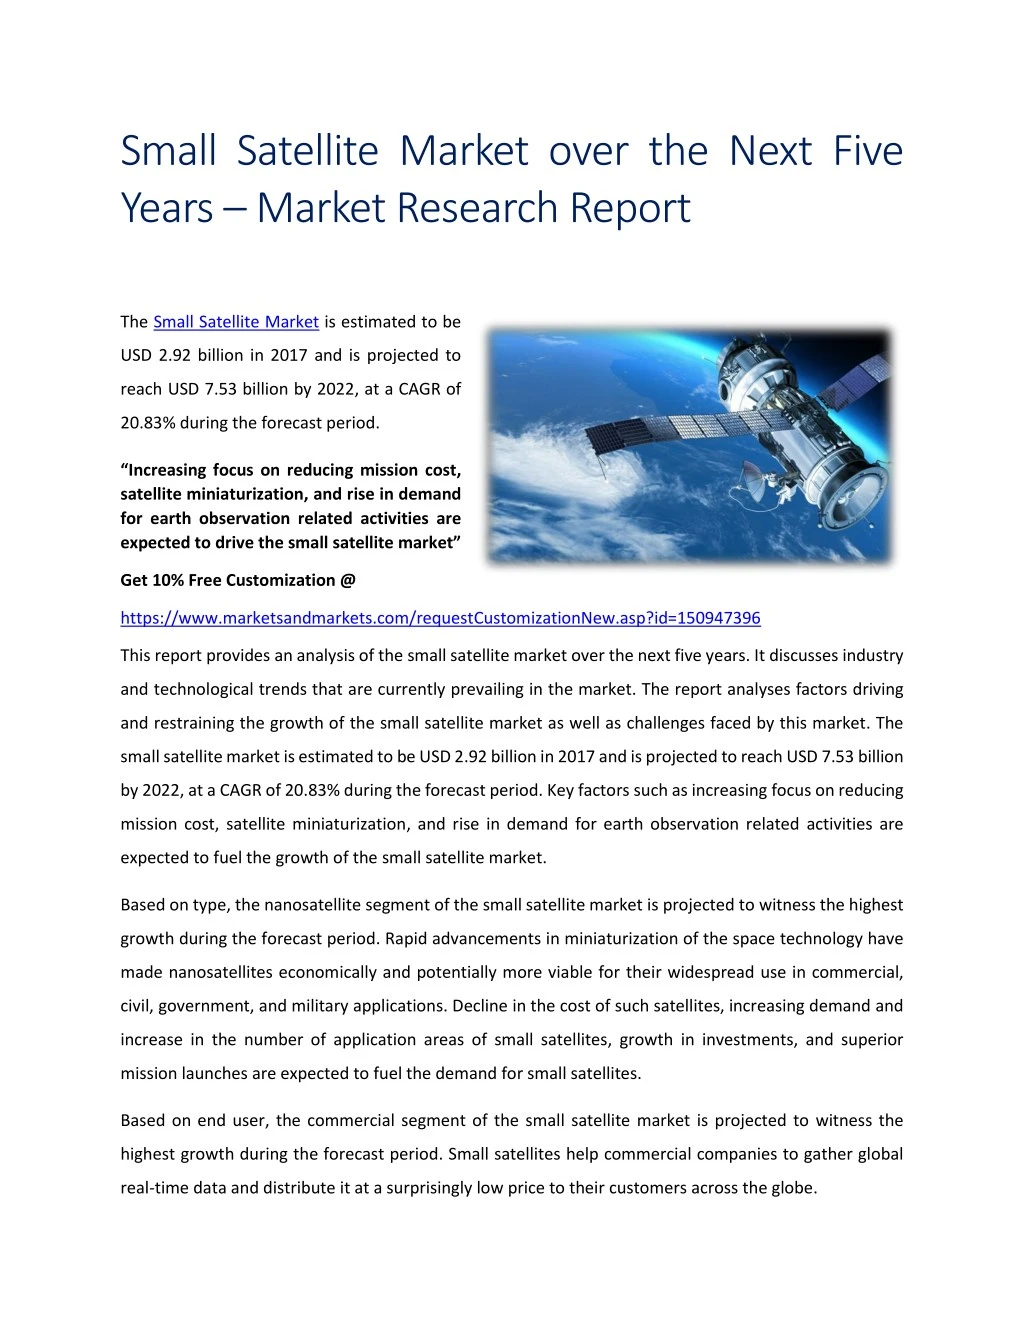 small satellite market over the next five years